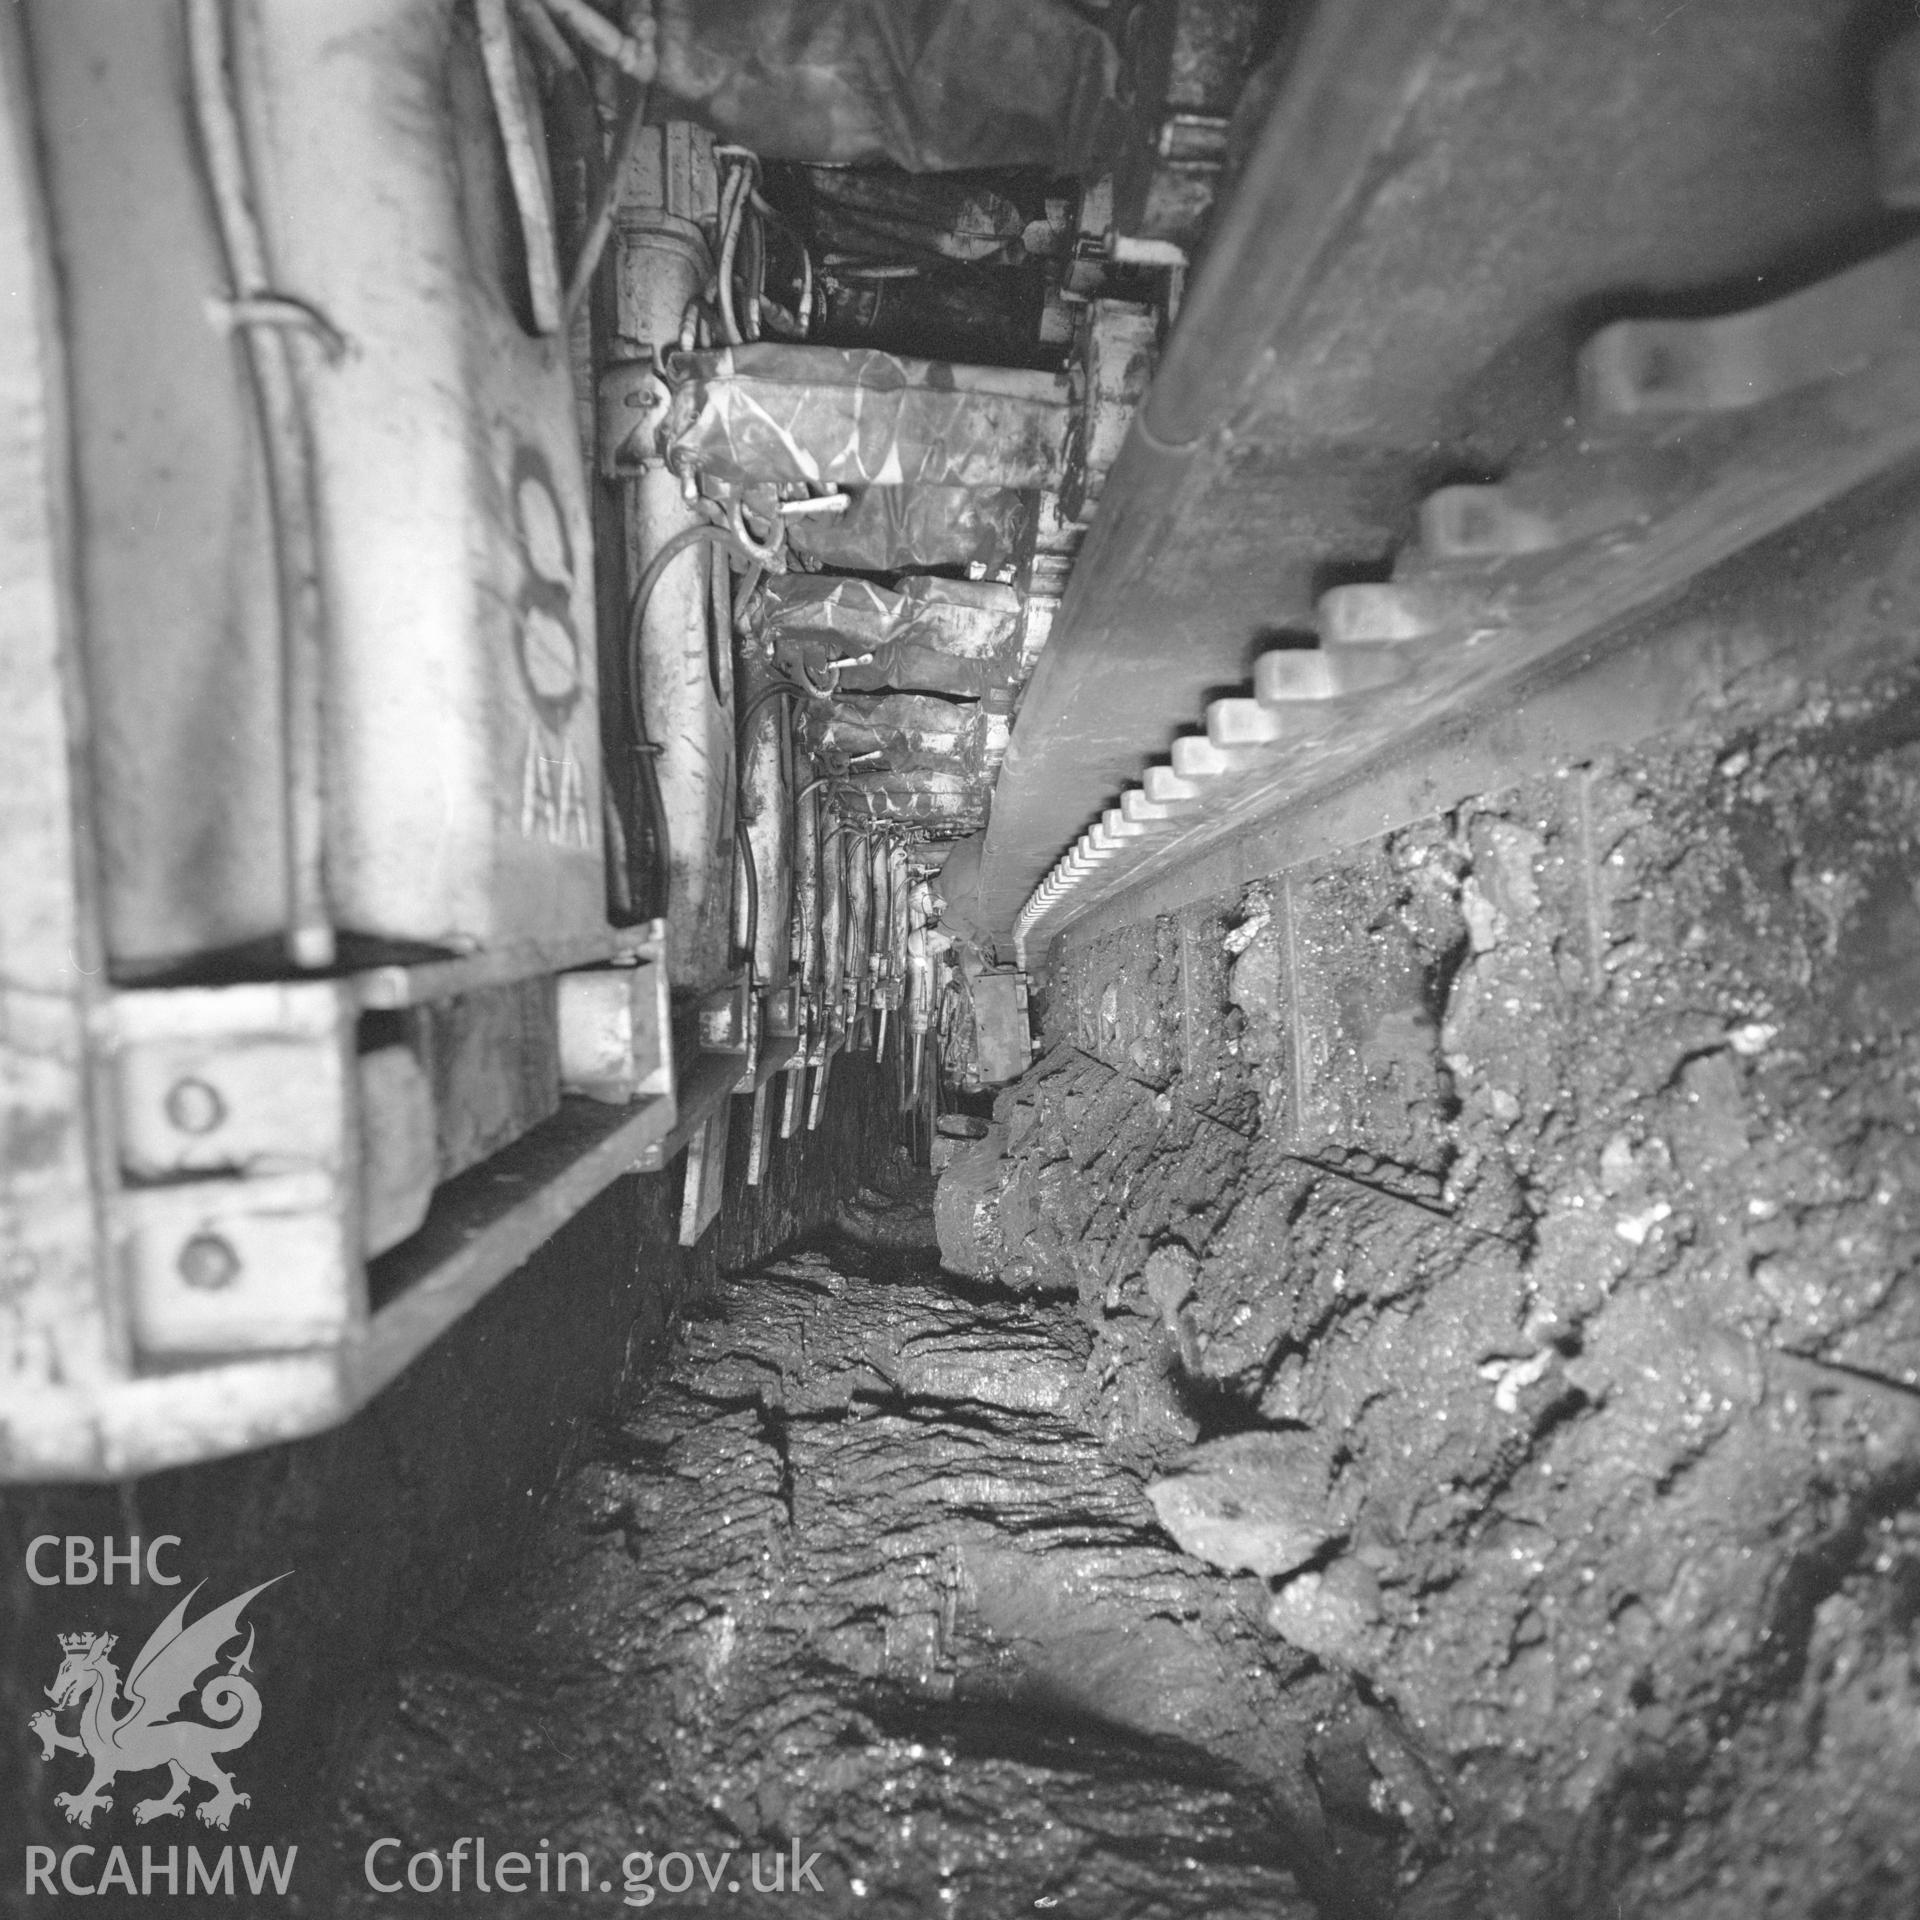 Digital copy of an acetate negative showing view along coal face at Blaenant Colliery, from the John Cornwell Collection.